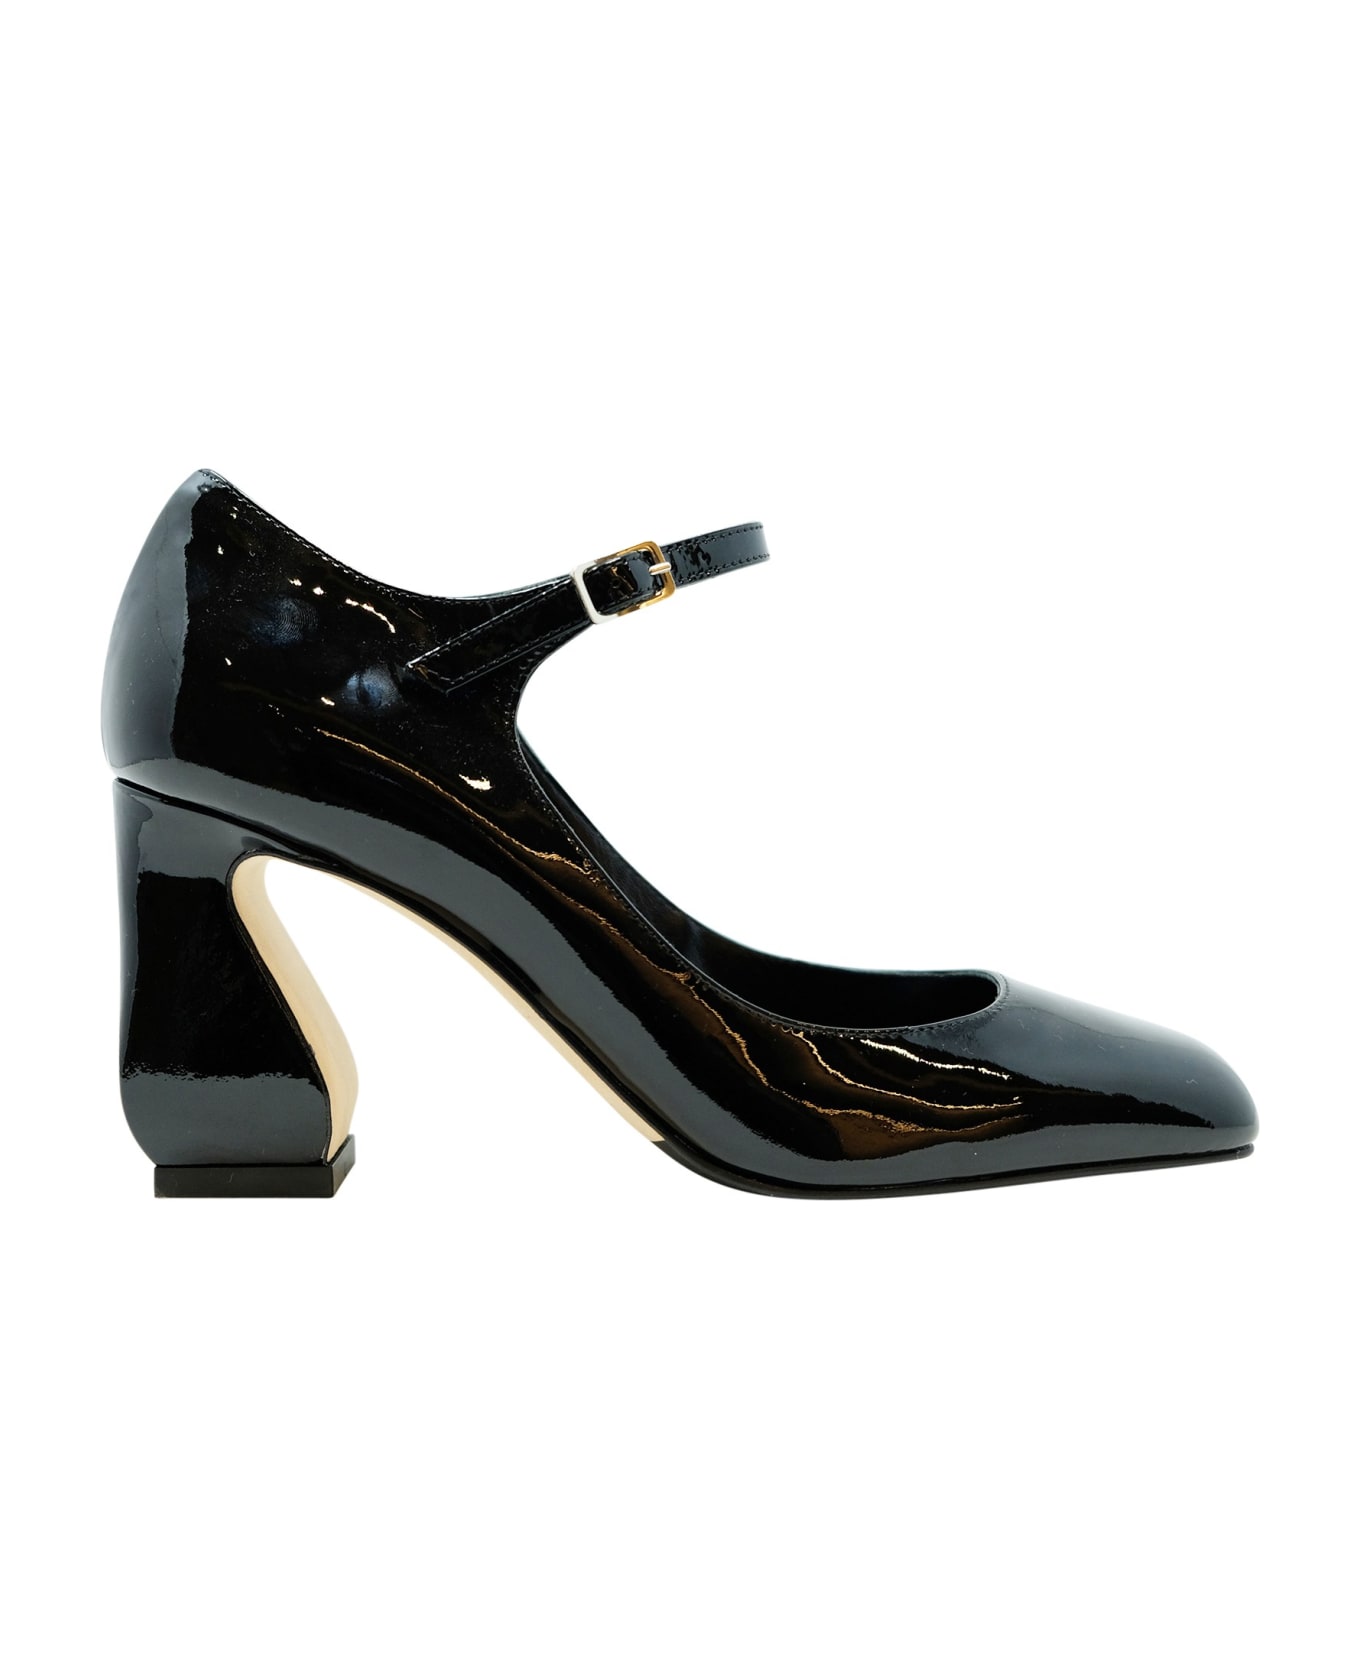 SI Rossi Black Patent Leather Pumps